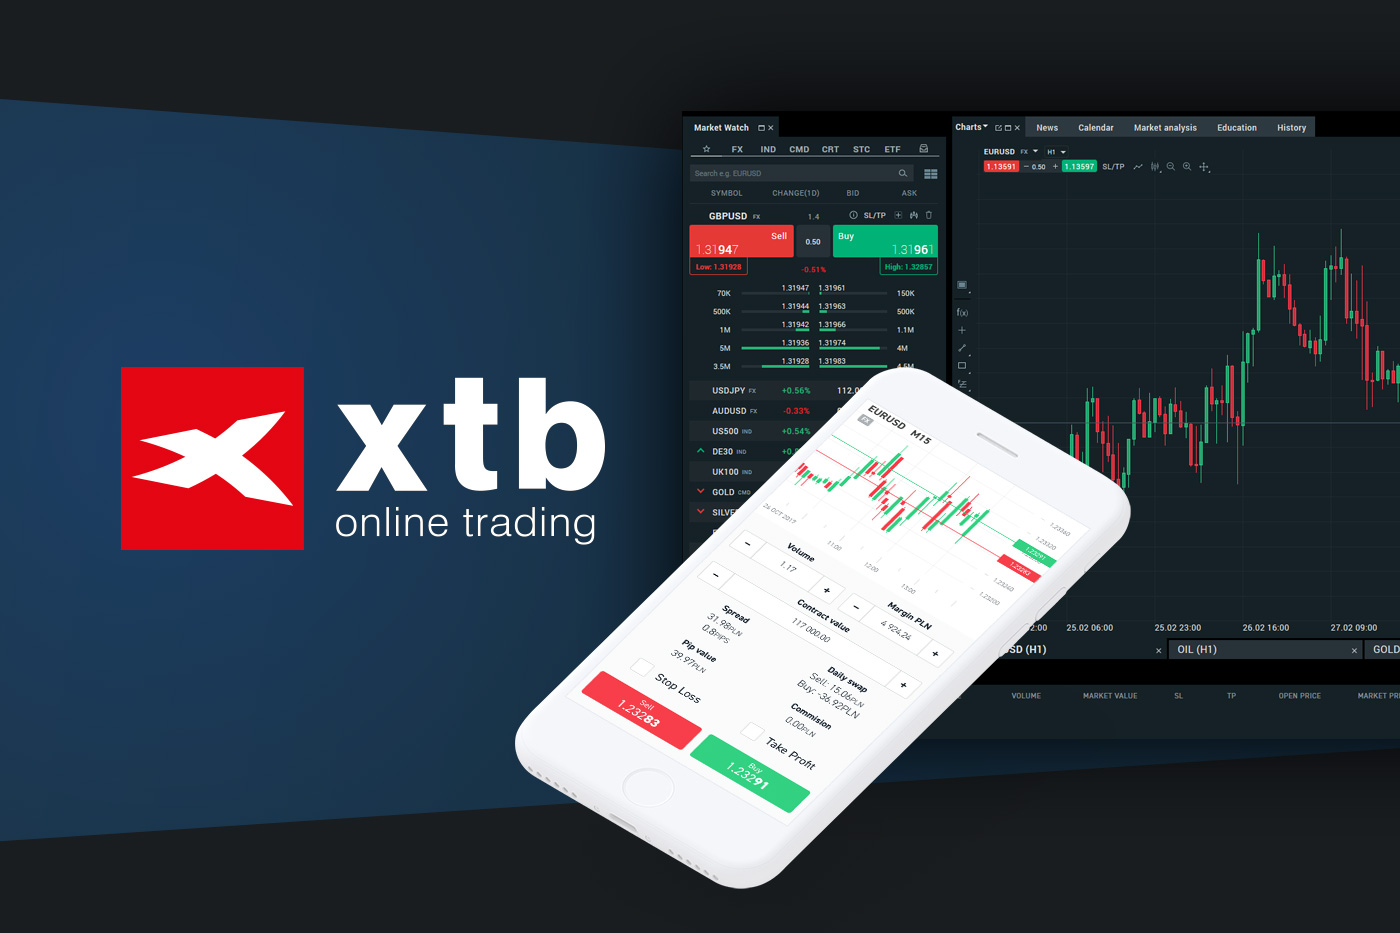 Xtb forex cup award bitcoins wallet out of sync child